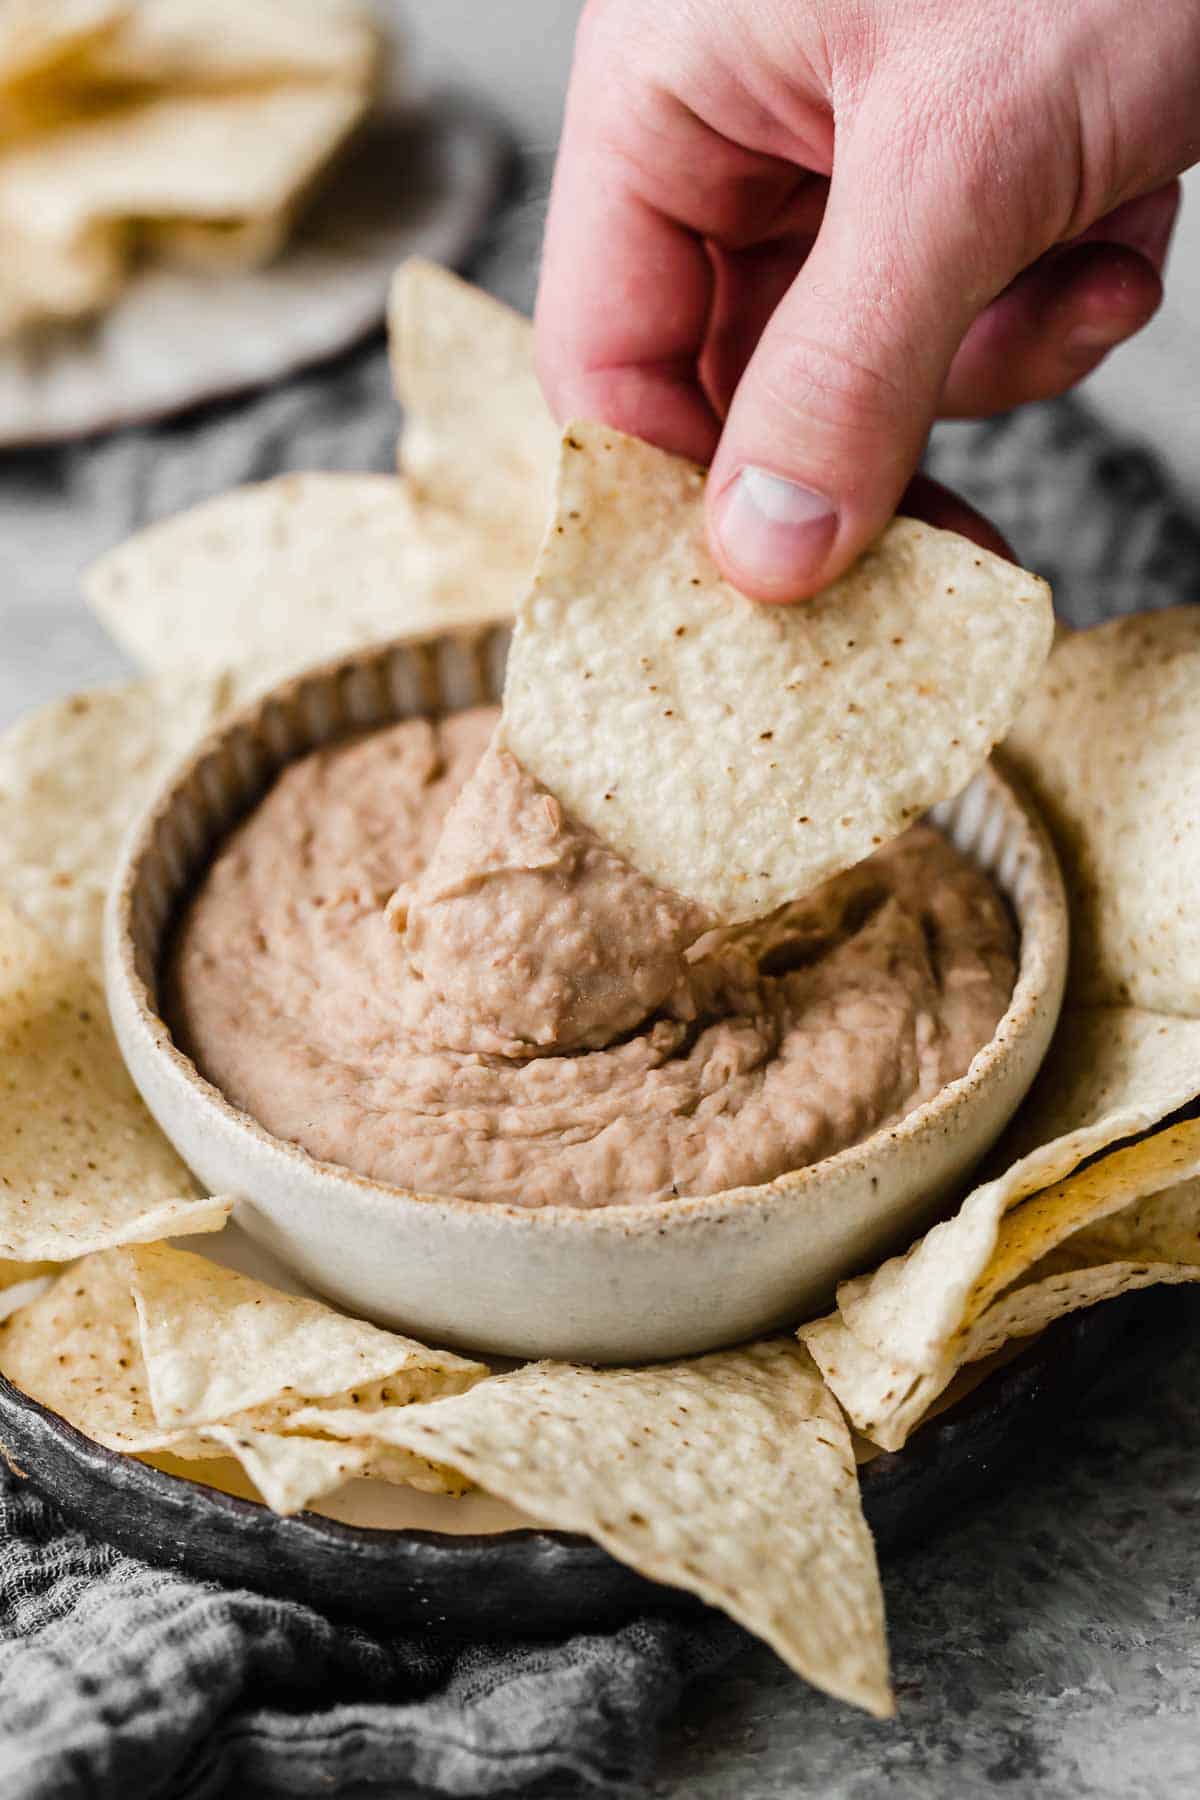 A tortilla chip being dipped into a bowl filled with homemade refried beans.